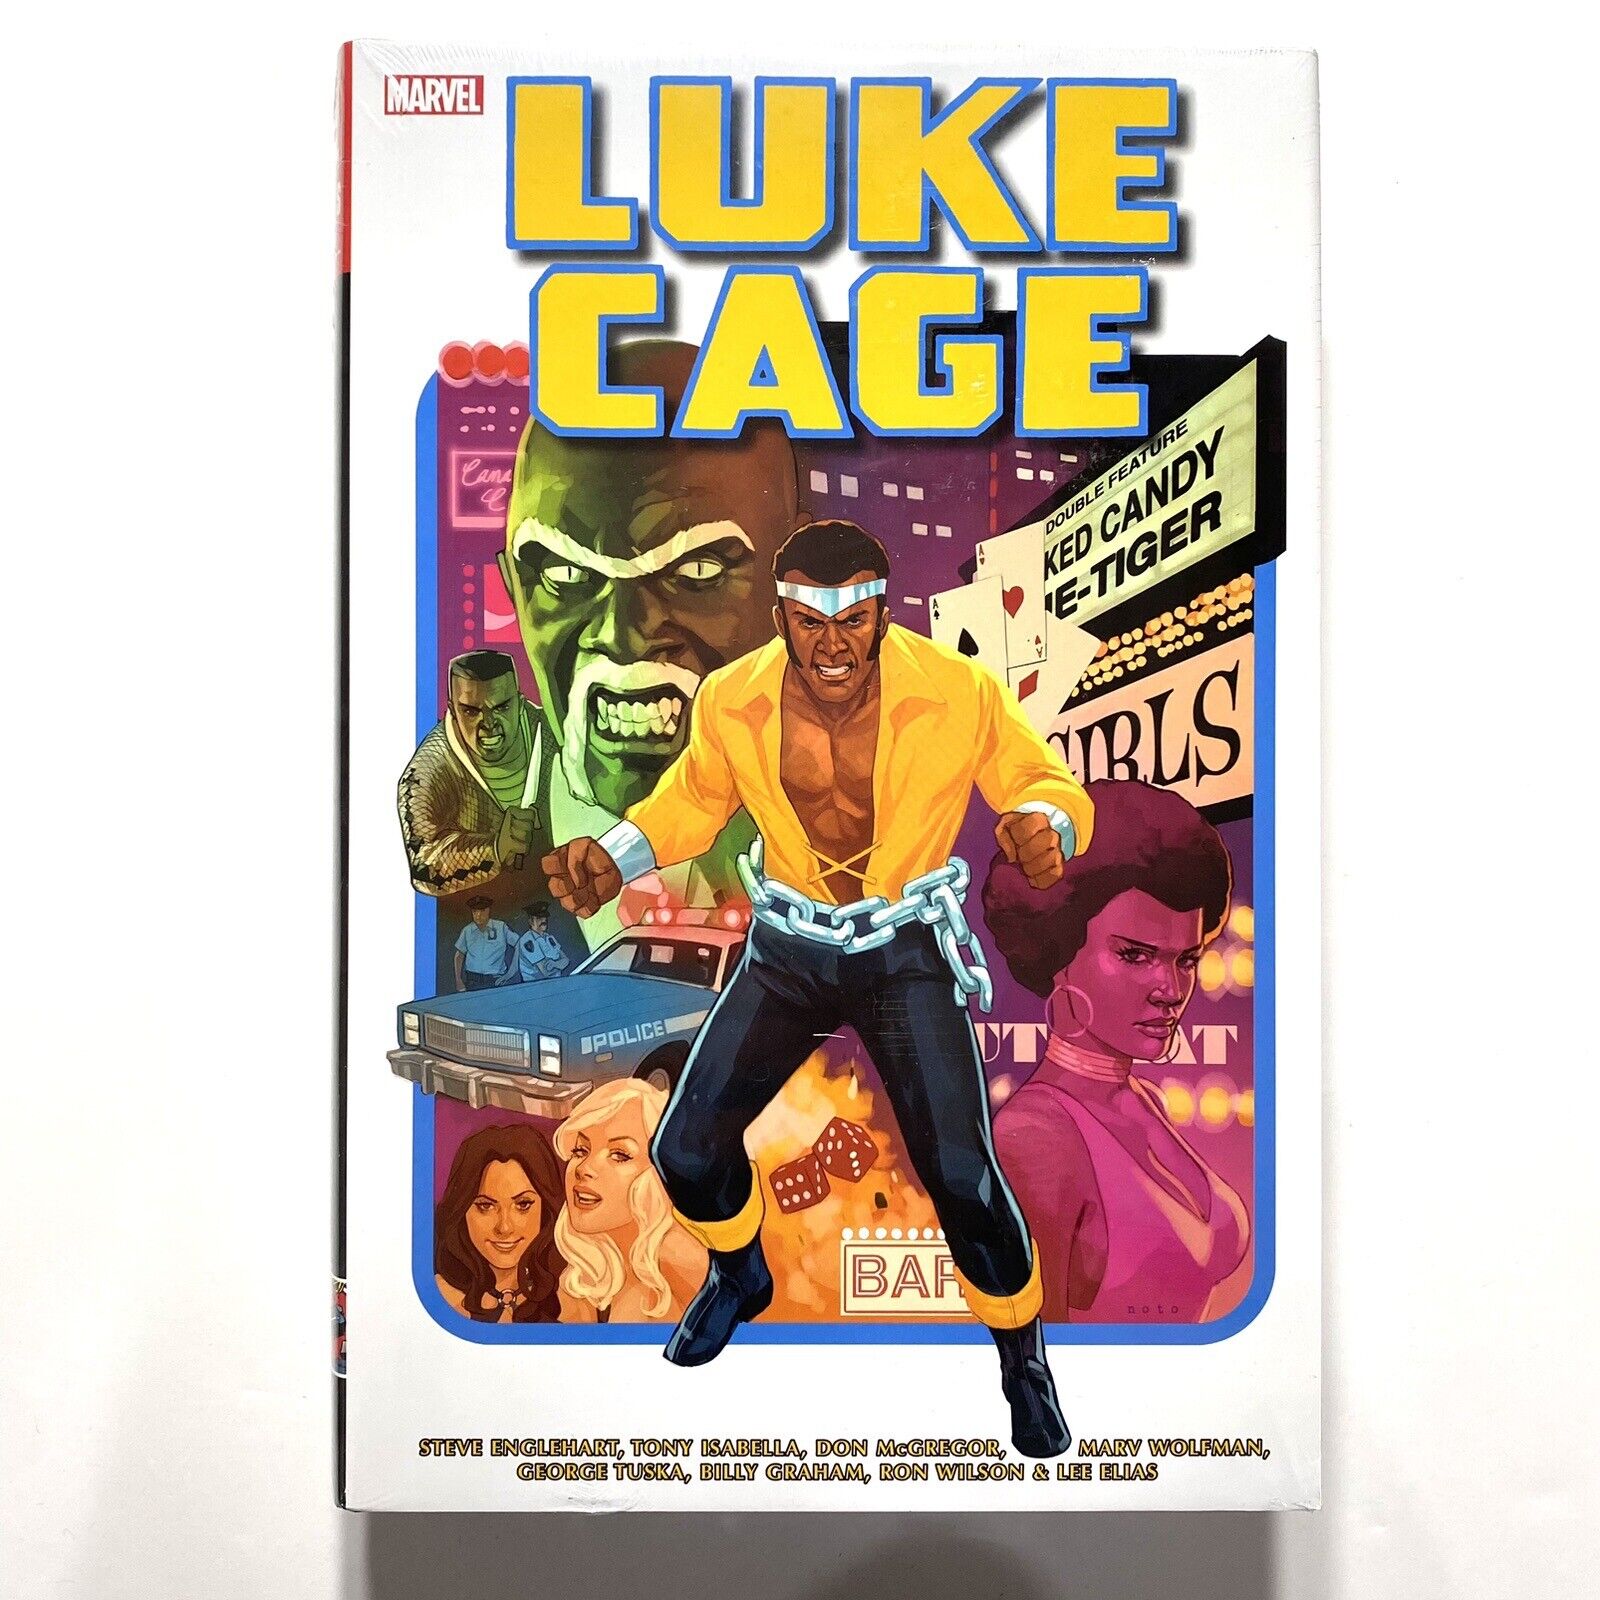 Luke Cage Omnibus Vol 1 New Sealed Hardcover Ships From United States of America